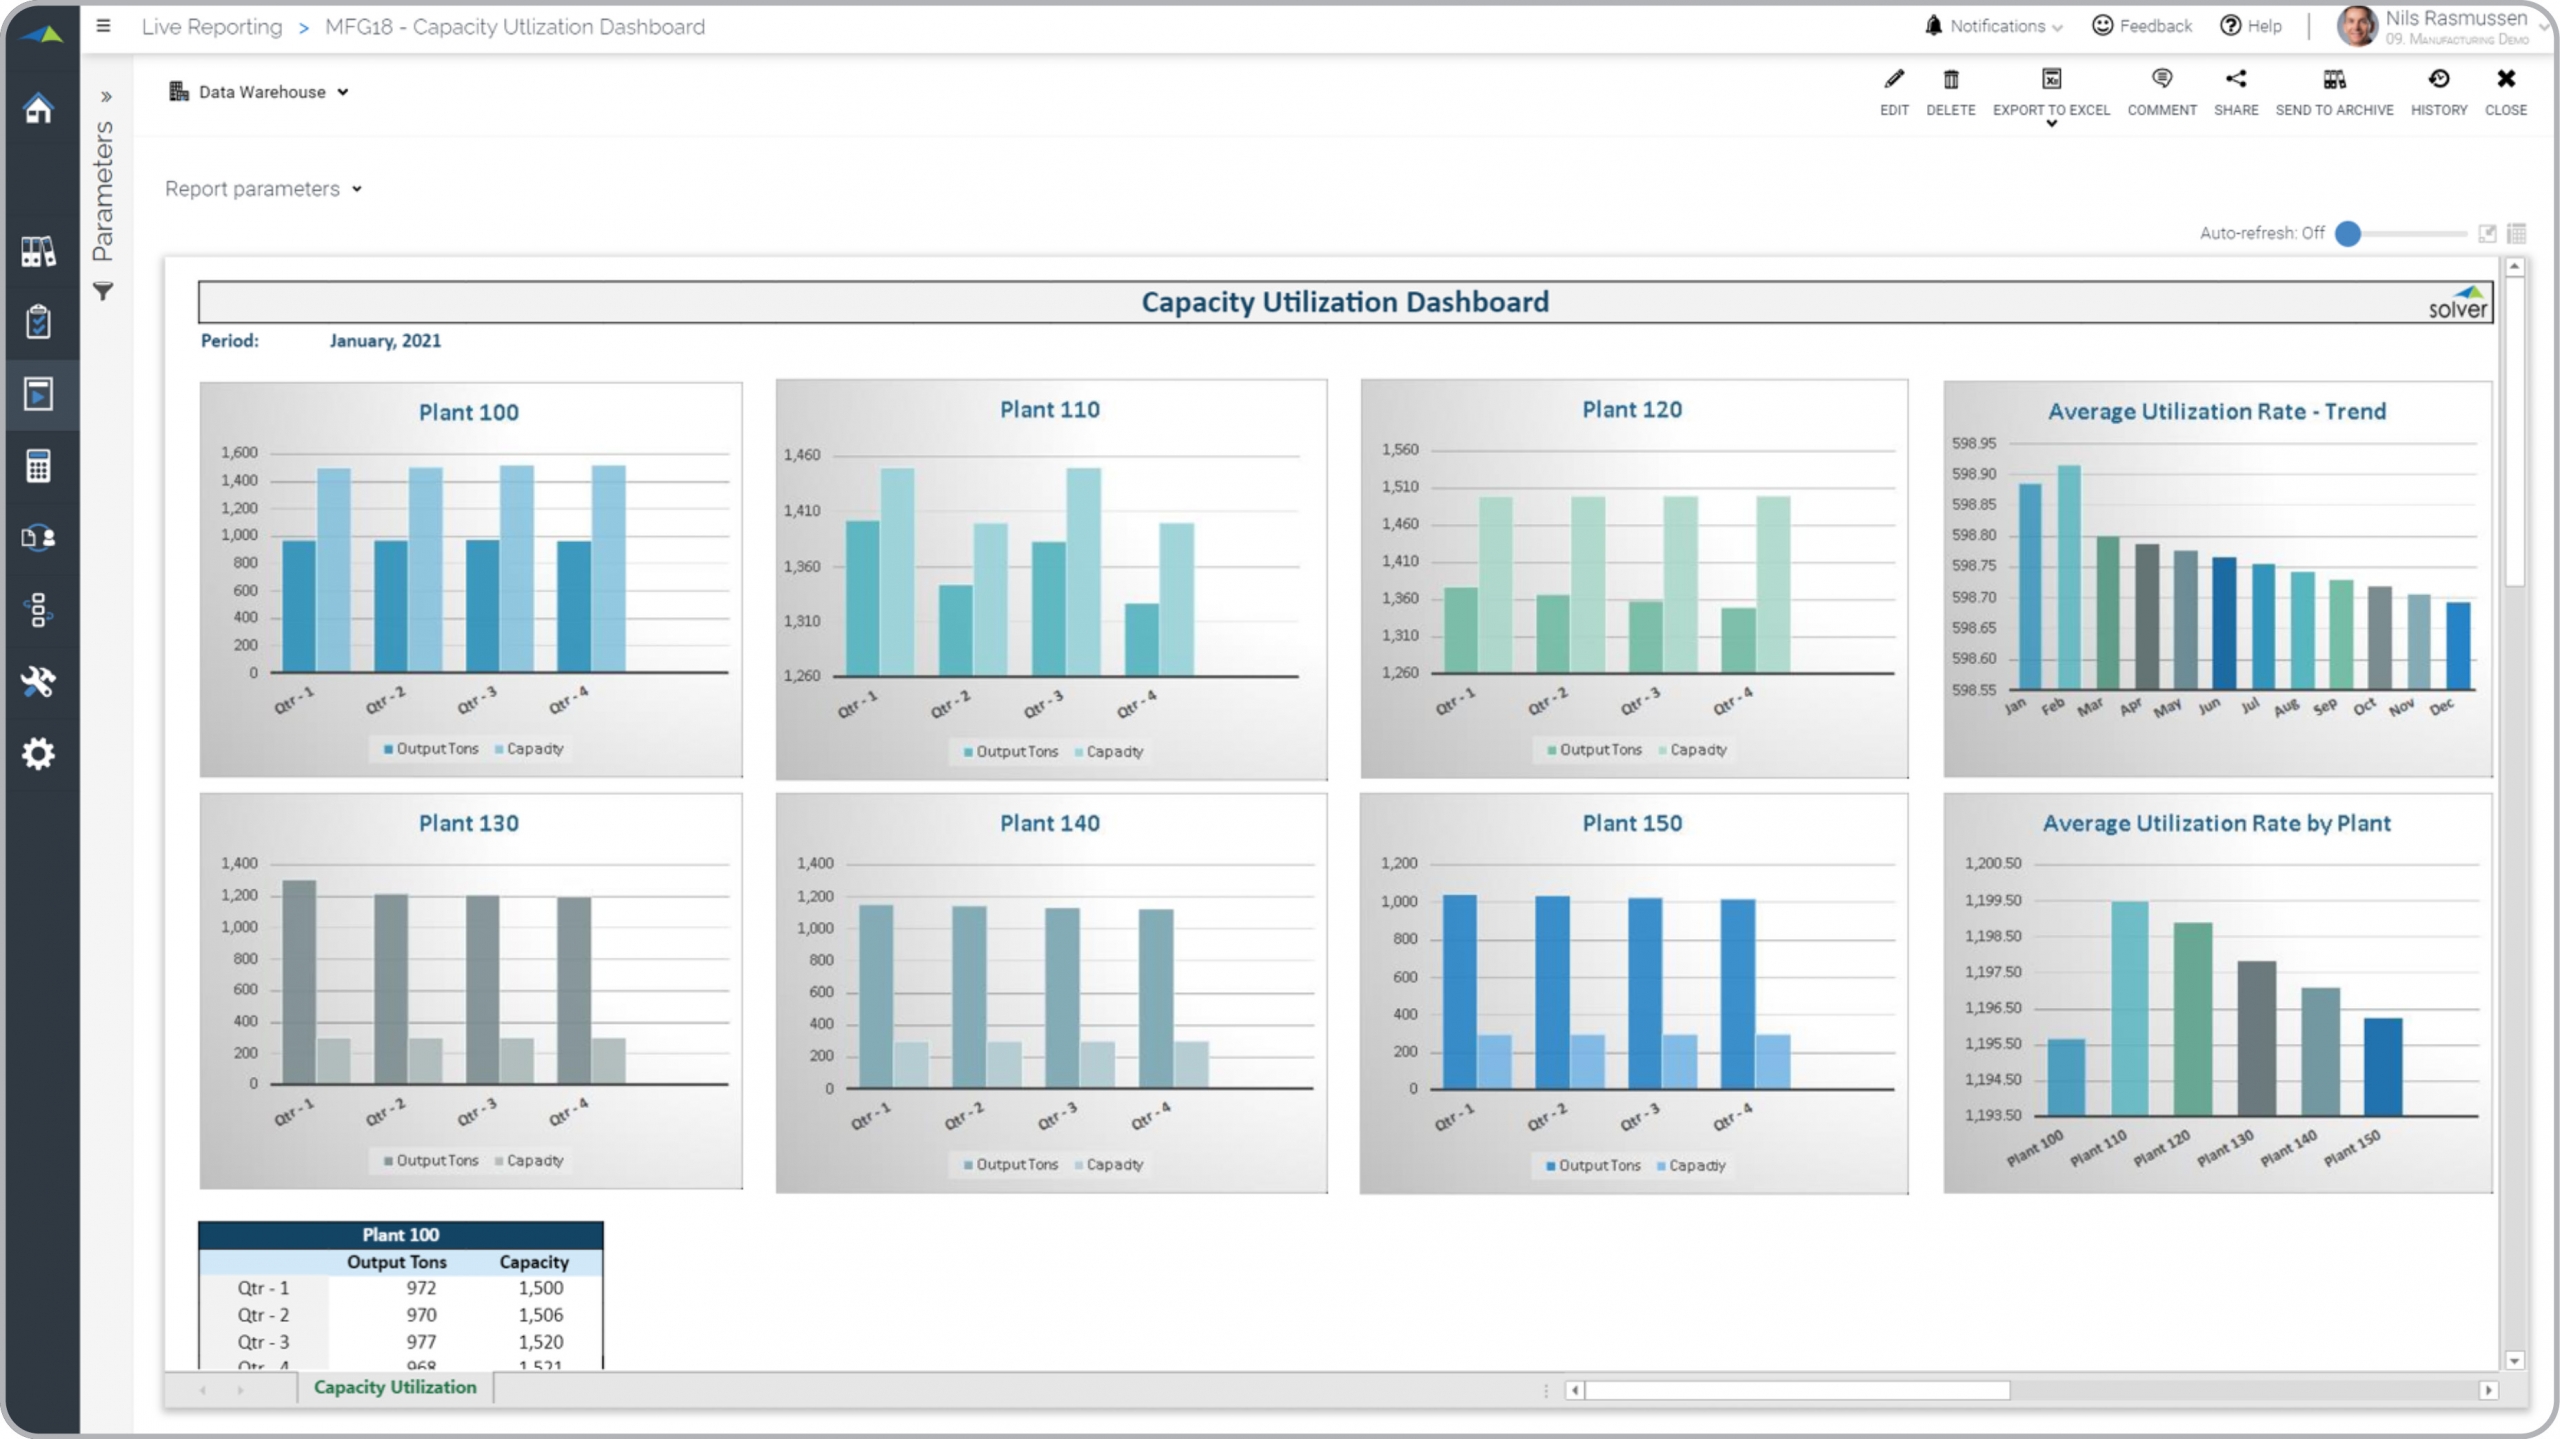 Example of a Capacity Utilization Dashboard with Manufacturing Plant Comparisons